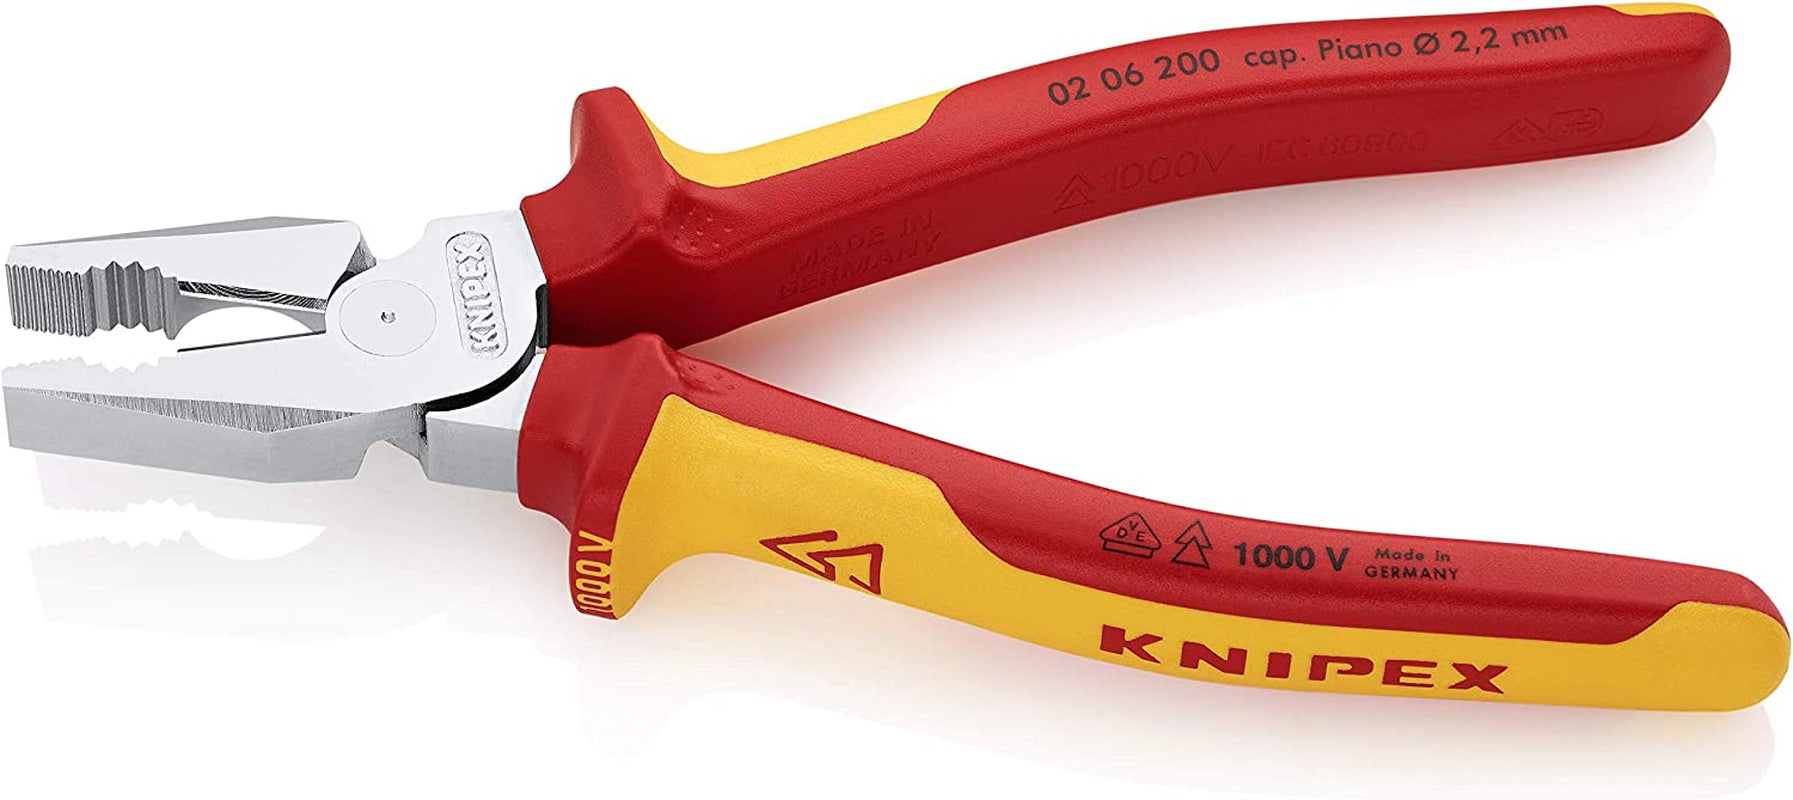 KNIPEX, Knipex 02 06 200 High Leverage Combination Pliers Chrome Plated Insulated with Multi-Component Grips, Vde-Tested, 200 Mm